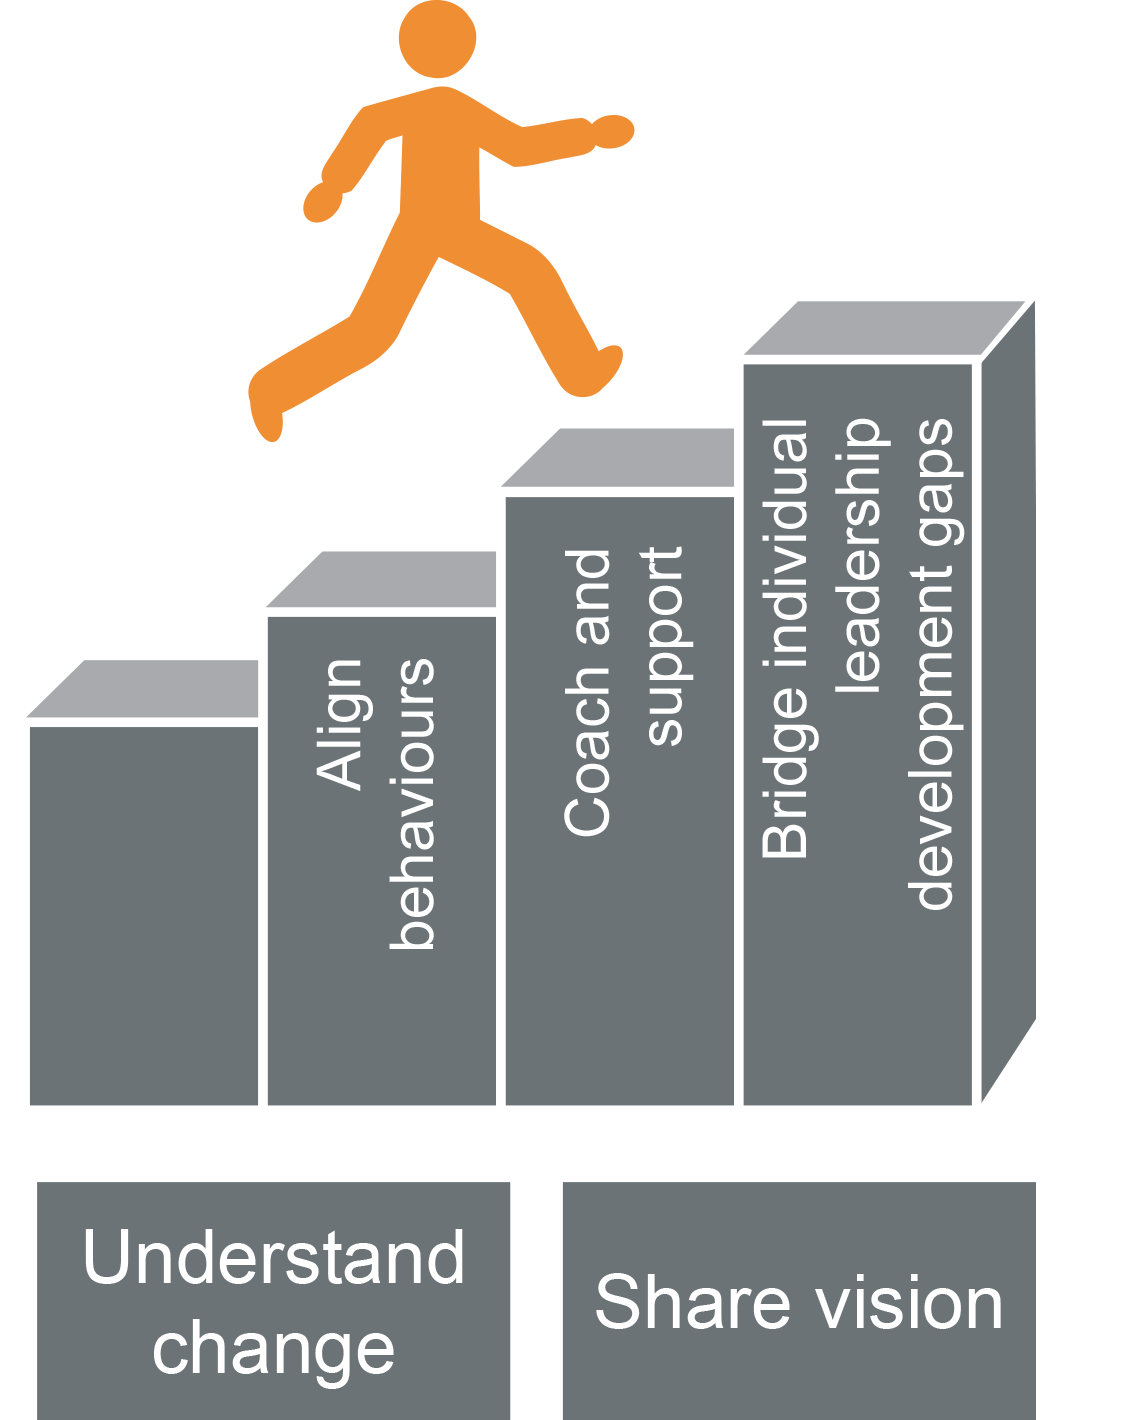 A level graph that describes how the company understands change that is needed
                	and how the will share the vision of their clients.